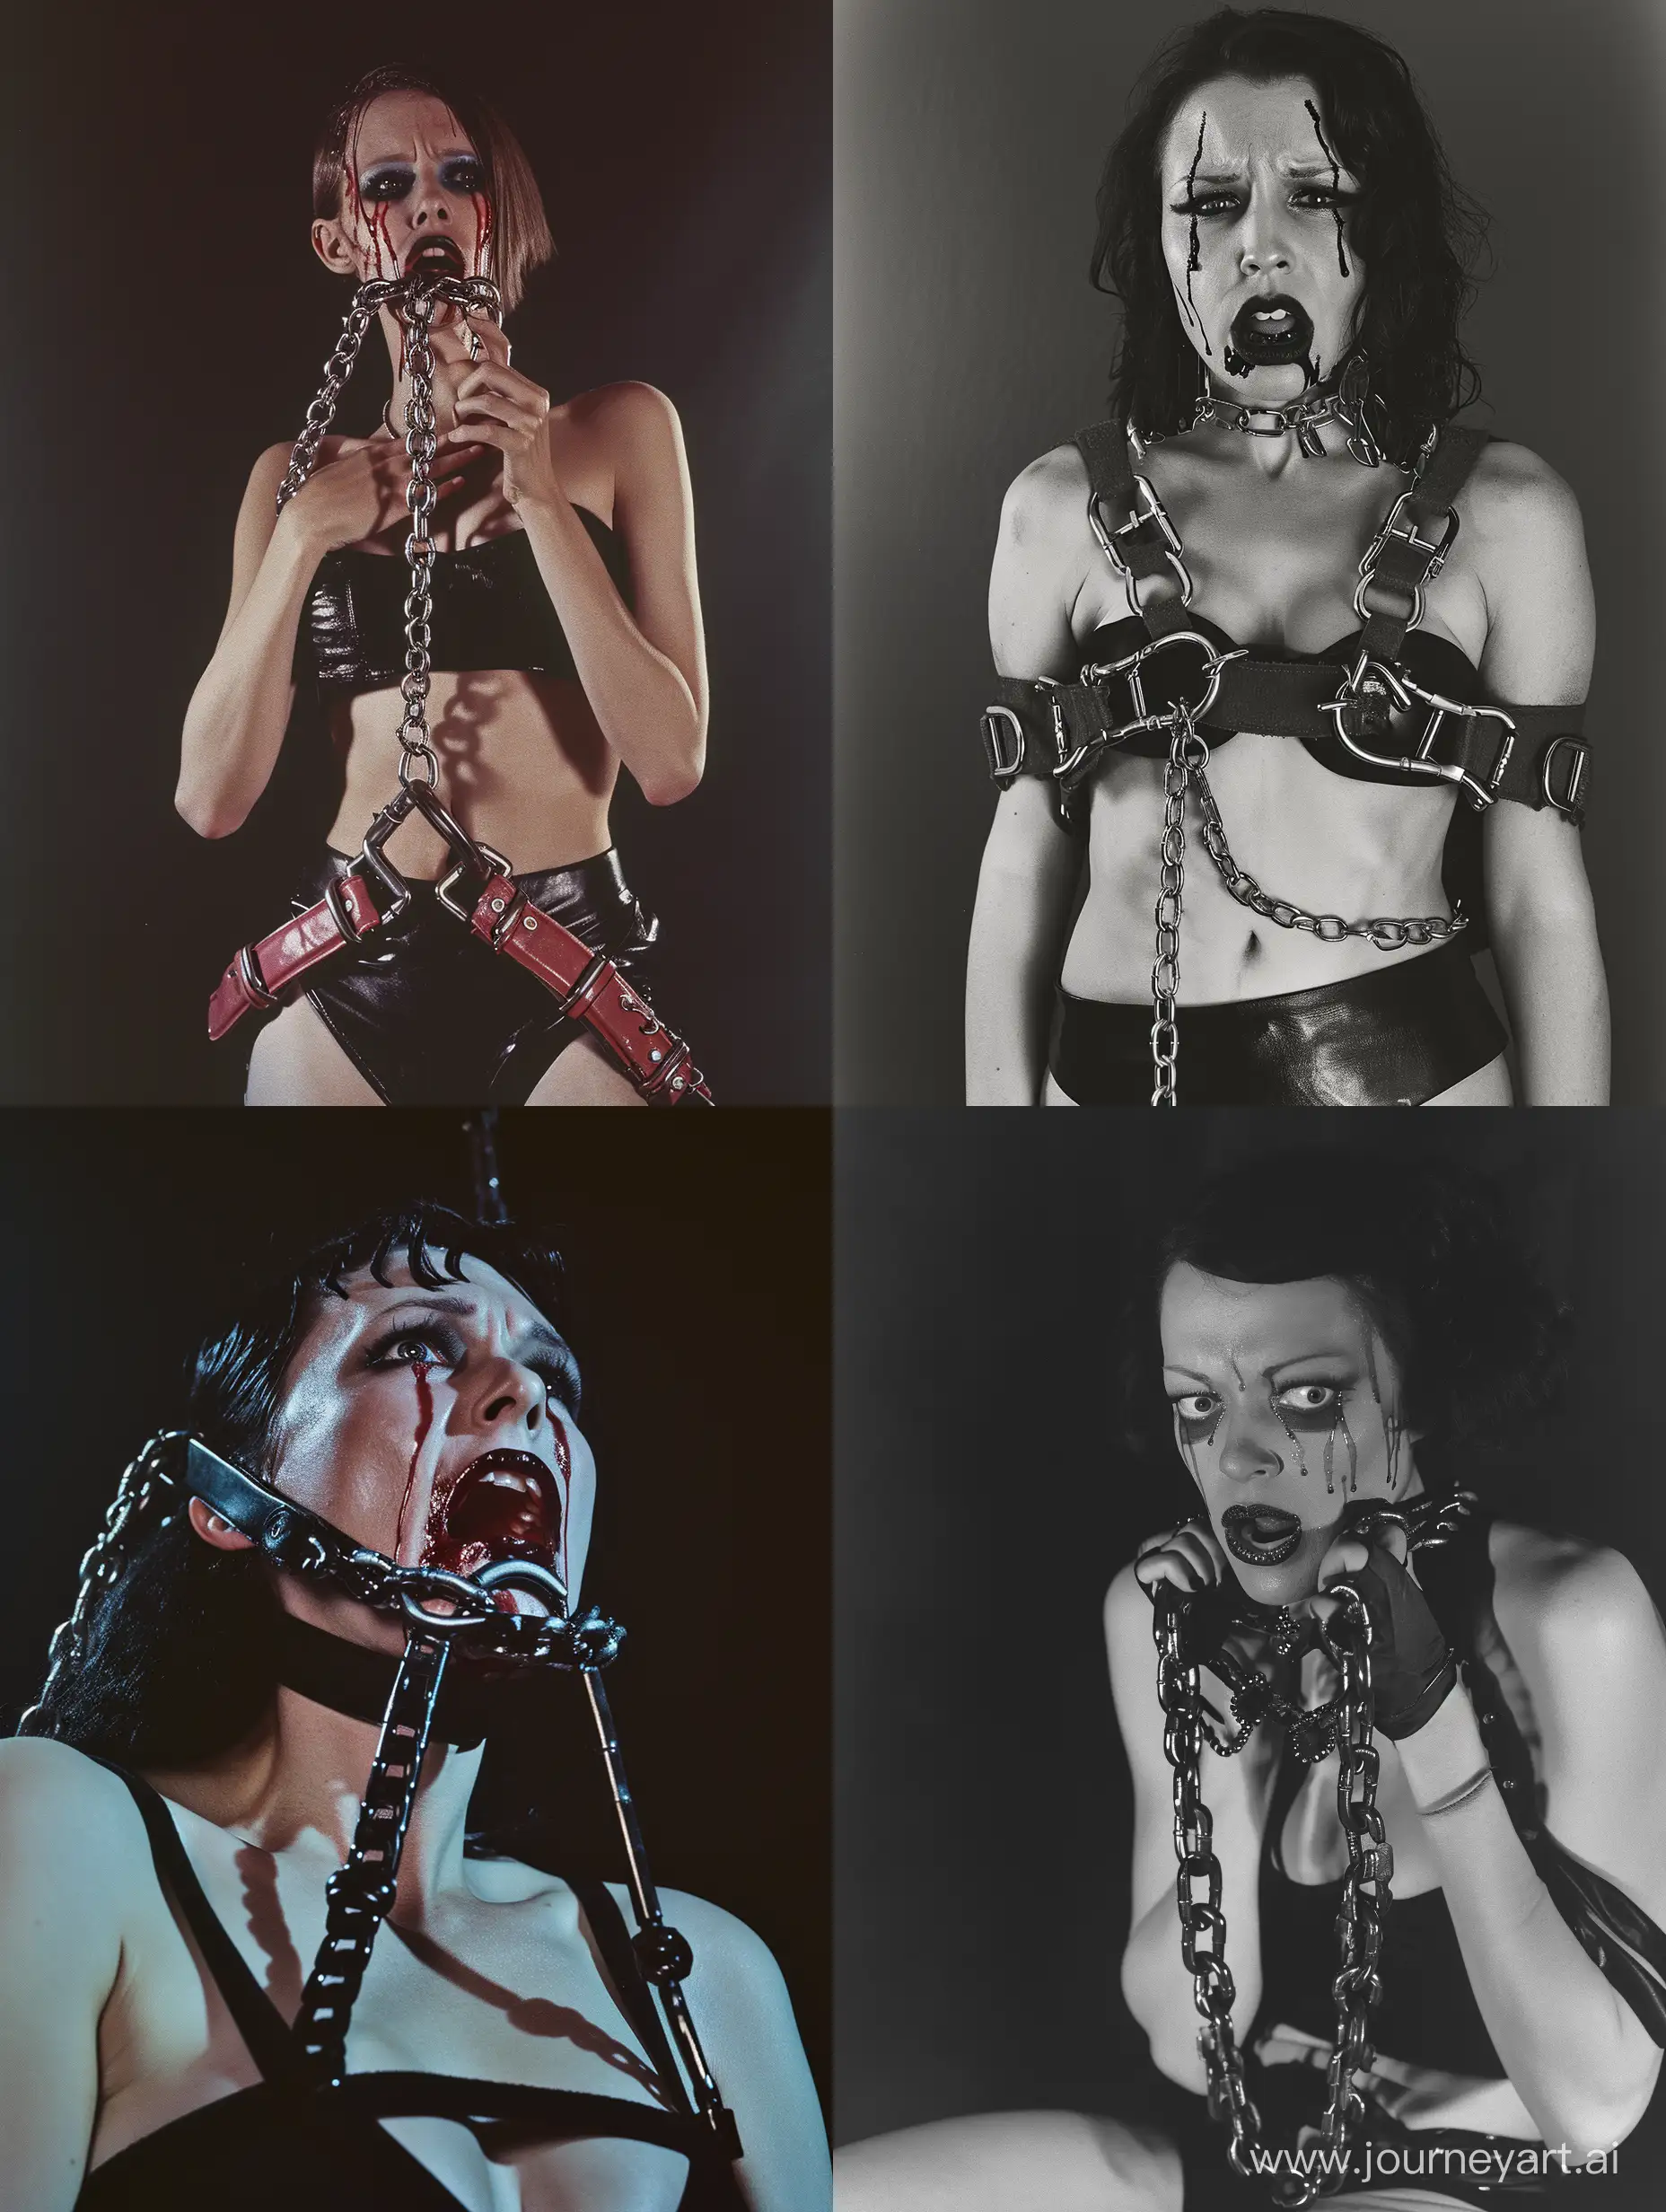 Unhinged-Woman-in-Chained-Harness-Provocative-TearStained-Makeup-Portrait